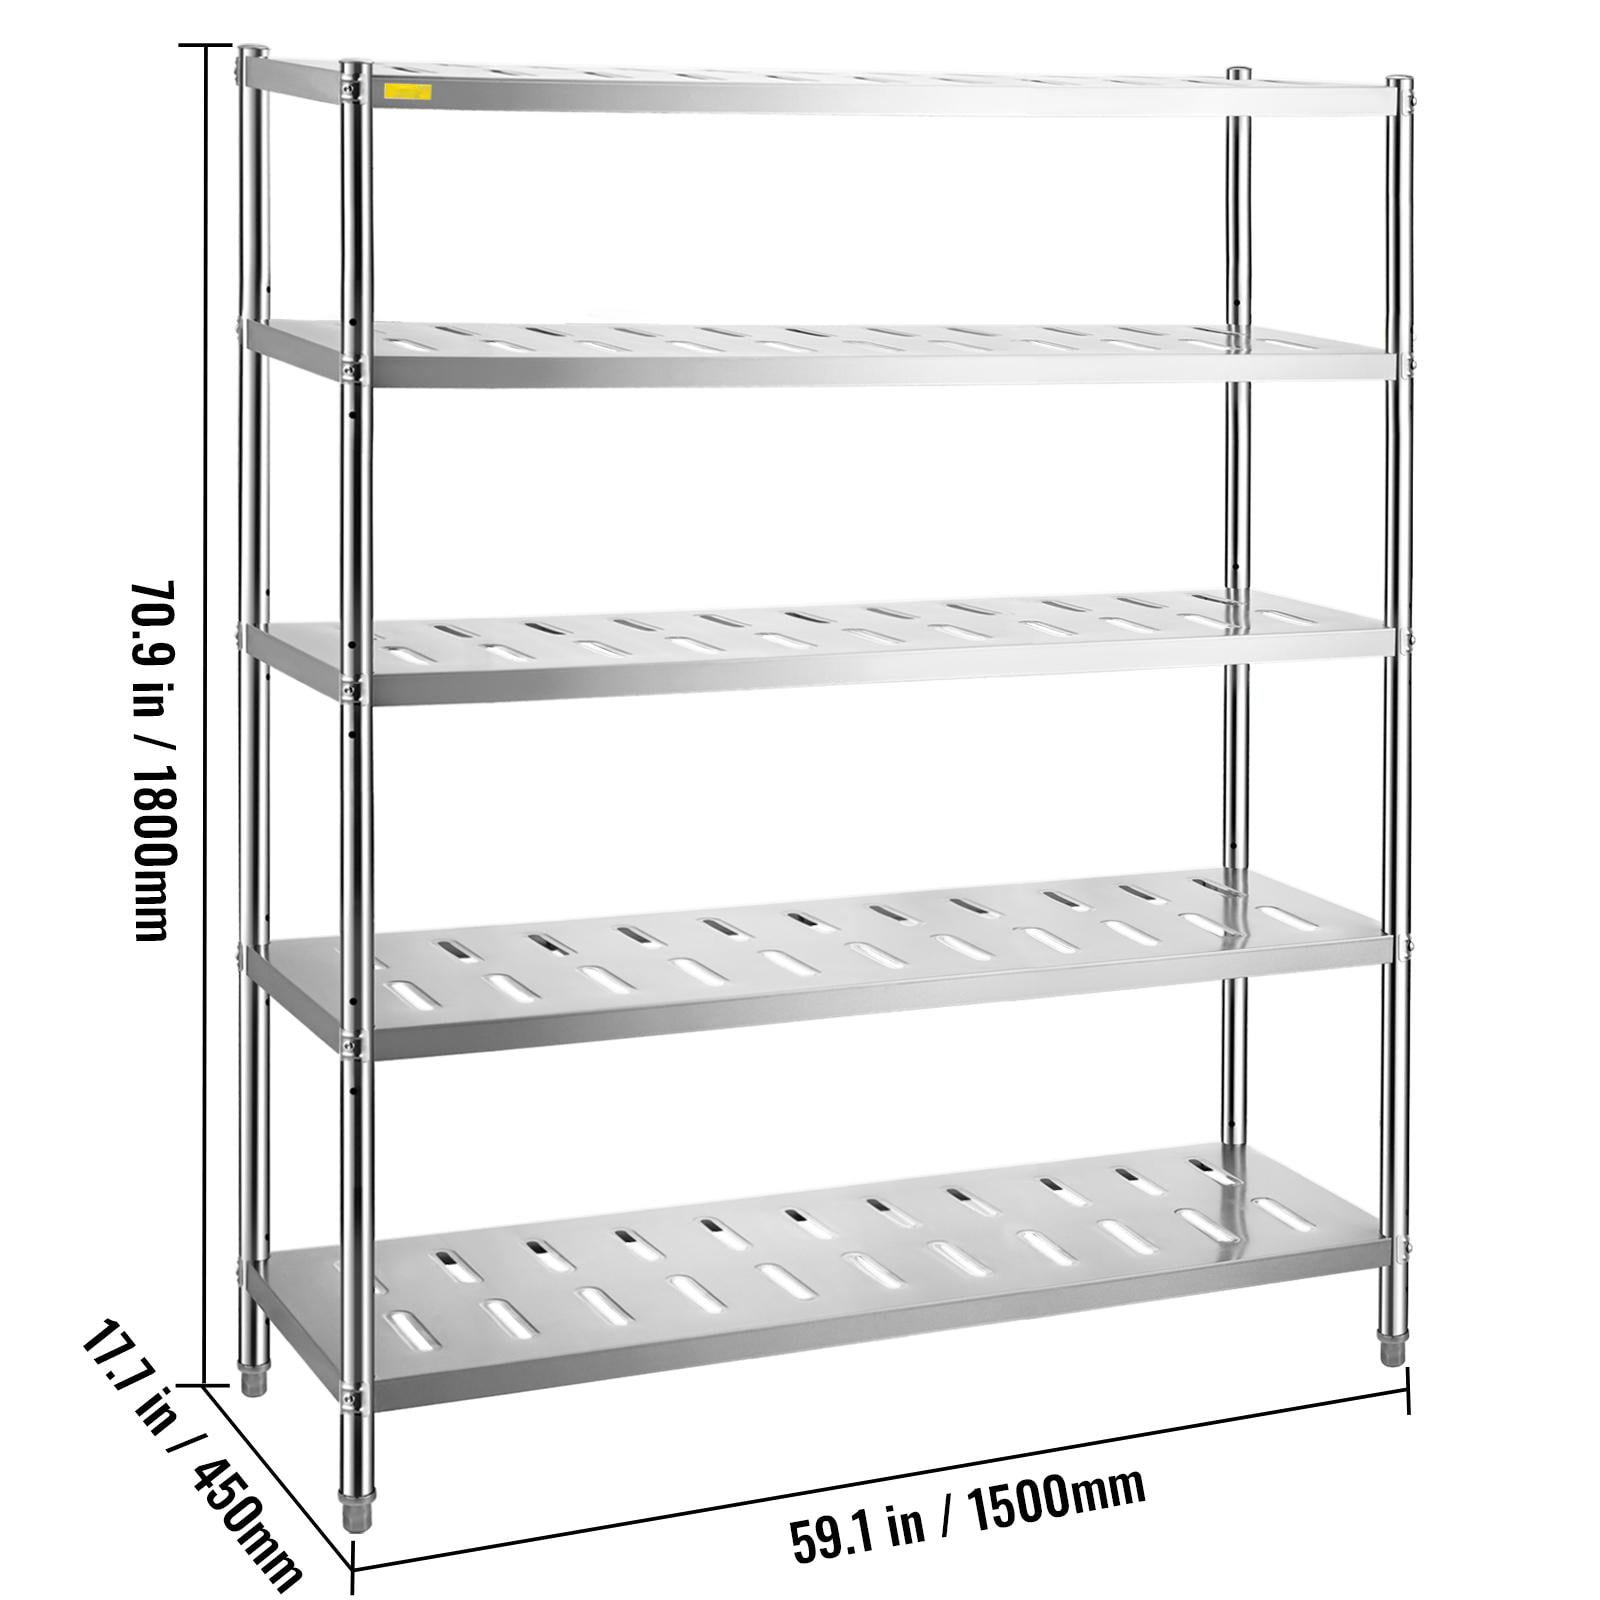 VBENLEM Stainless Steel Shelving 46.8x18.5 inch 4 Tier Adjustable Shelf Storage Unit Stainless Steel Heavy Duty Shelving for Kitchen Commercial